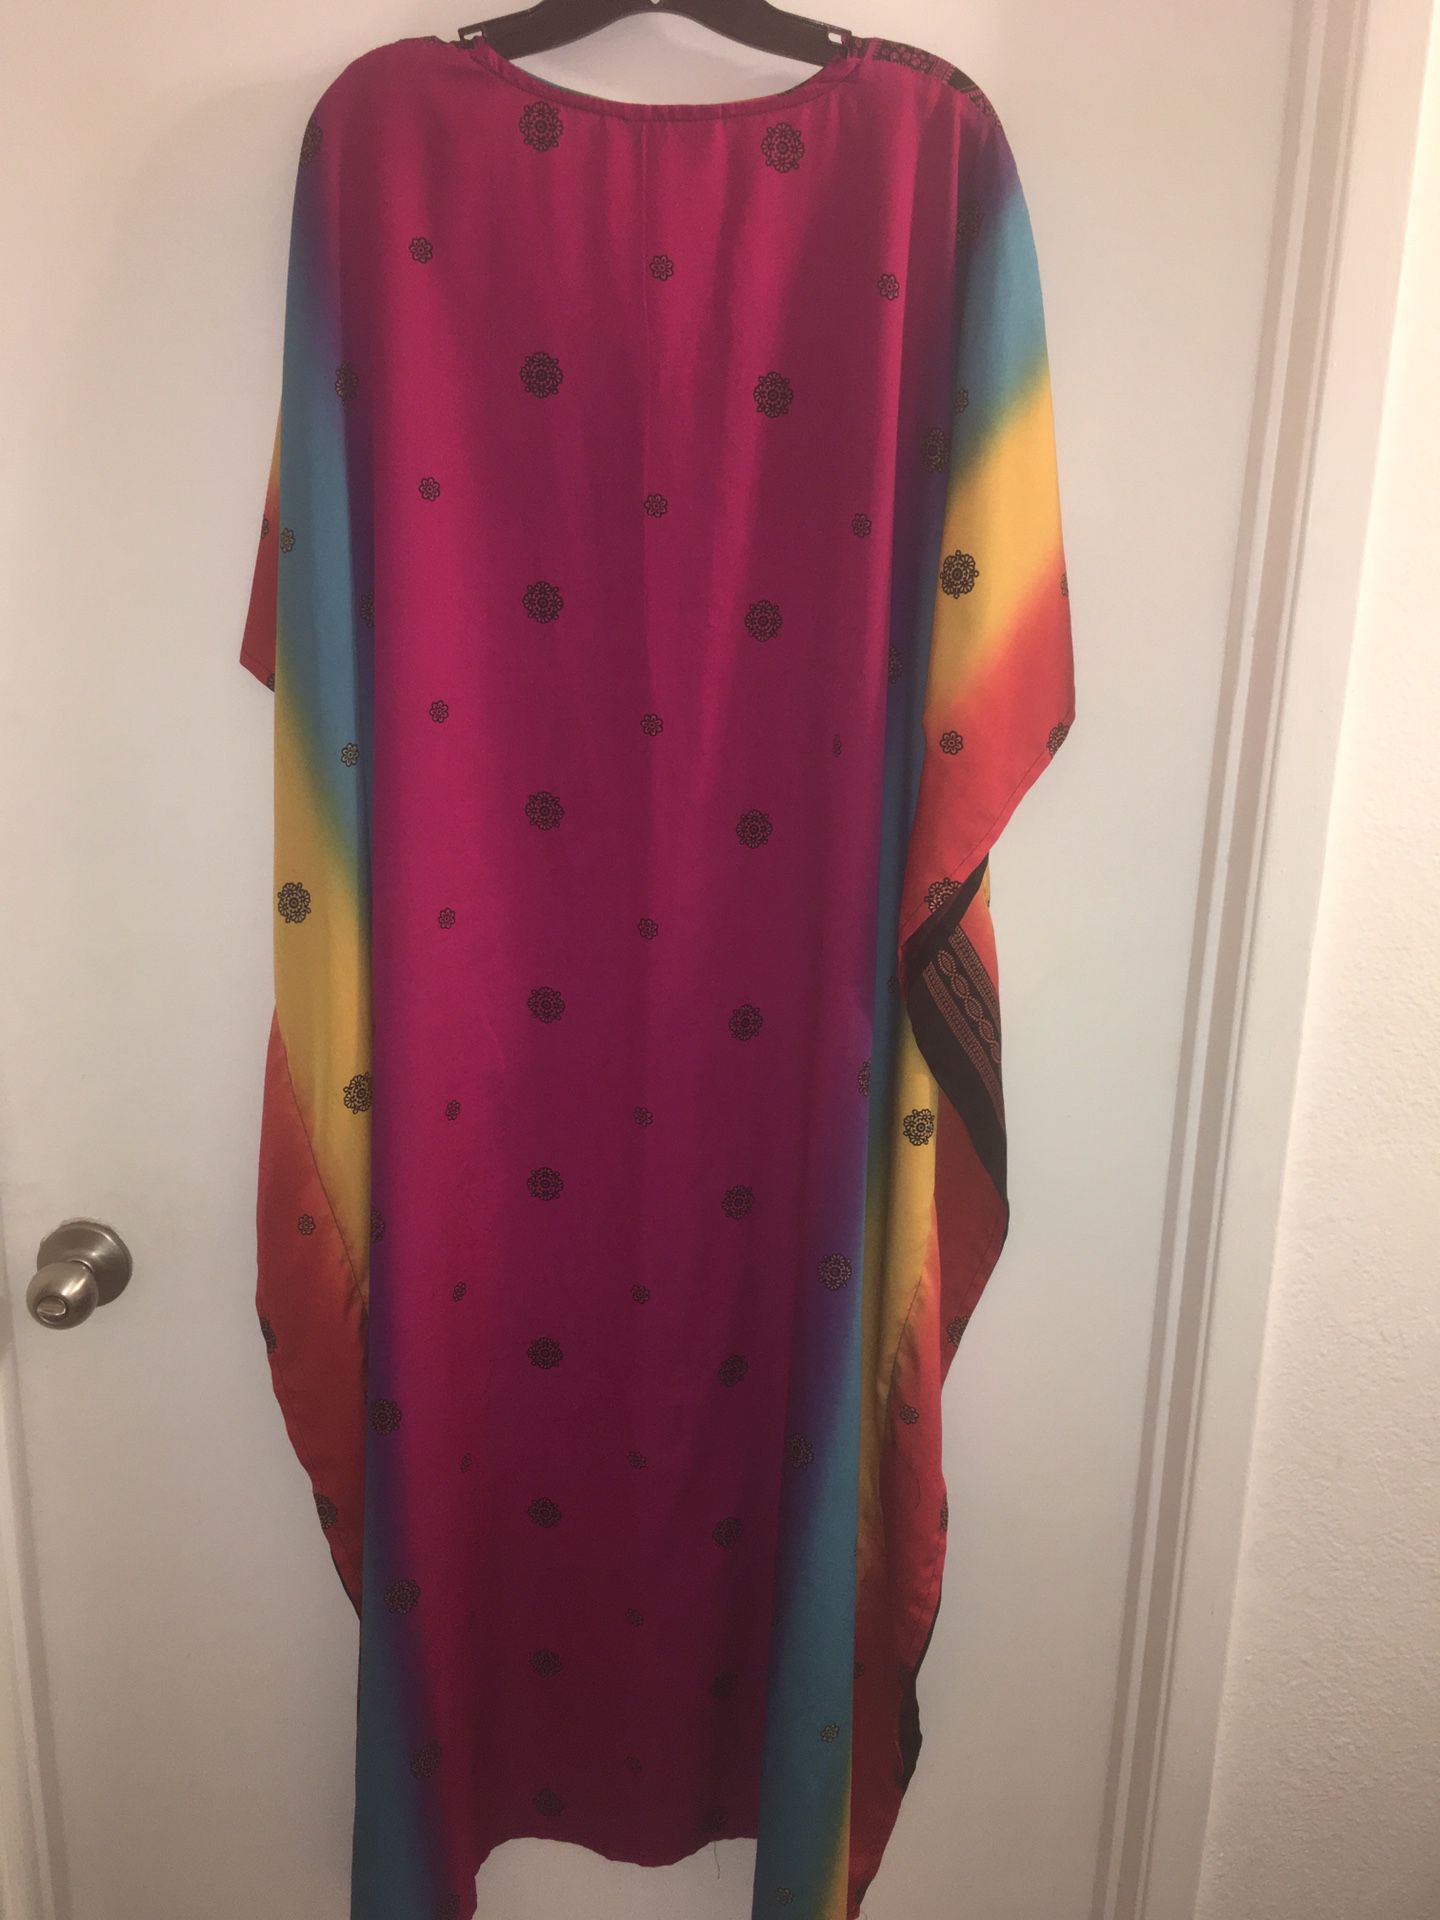 Ladies beautiful Moo Moo Dress for Sale in Carson, CA - OfferUp